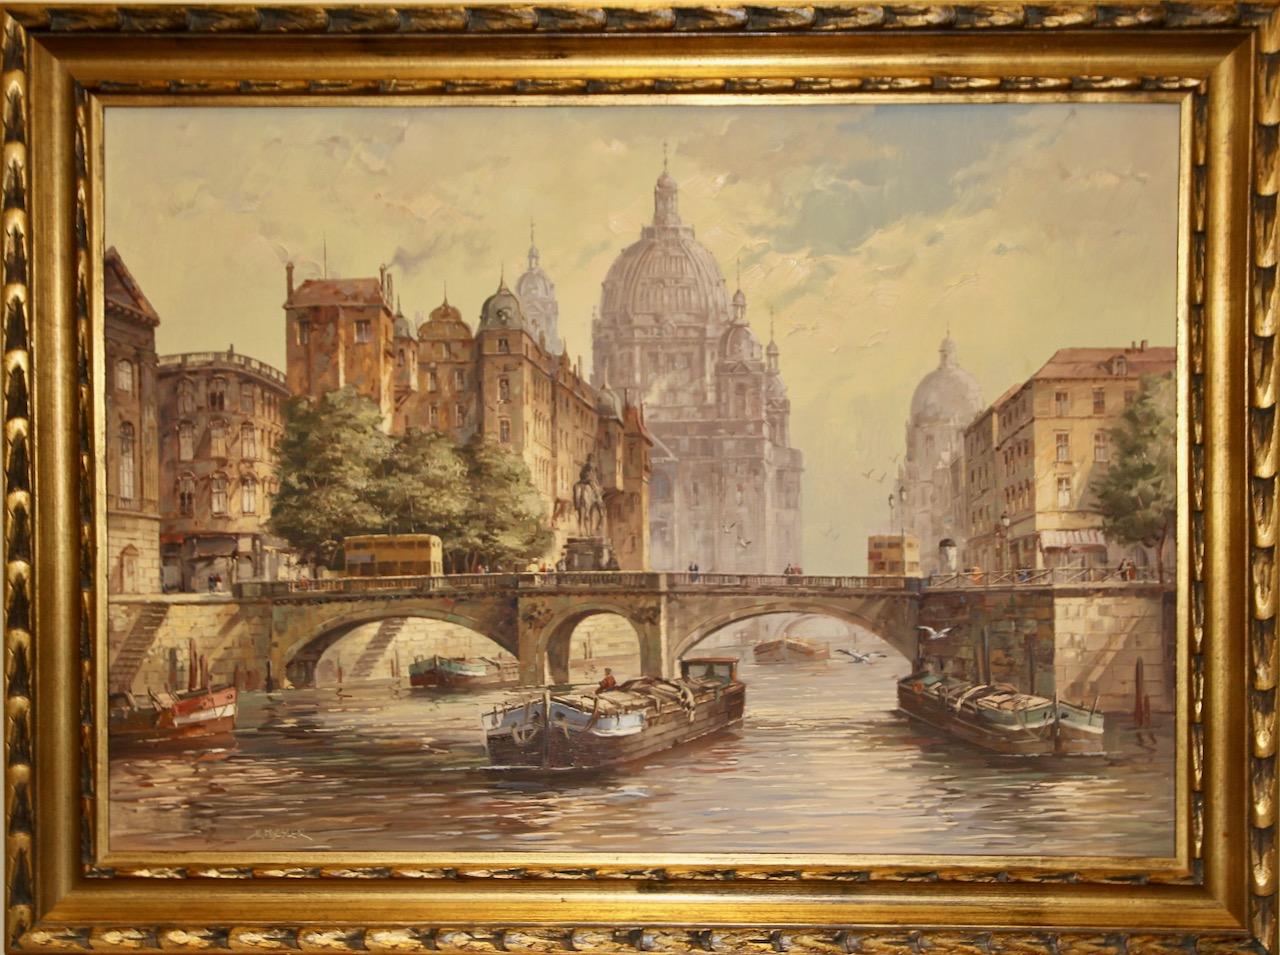 Horst Miesler, View of the Berlin Cathedral and the Spree.

Dimensions without frame 60.5 cm x 85 cm
Dimensions with frame 73.5 cm 98.5 cm